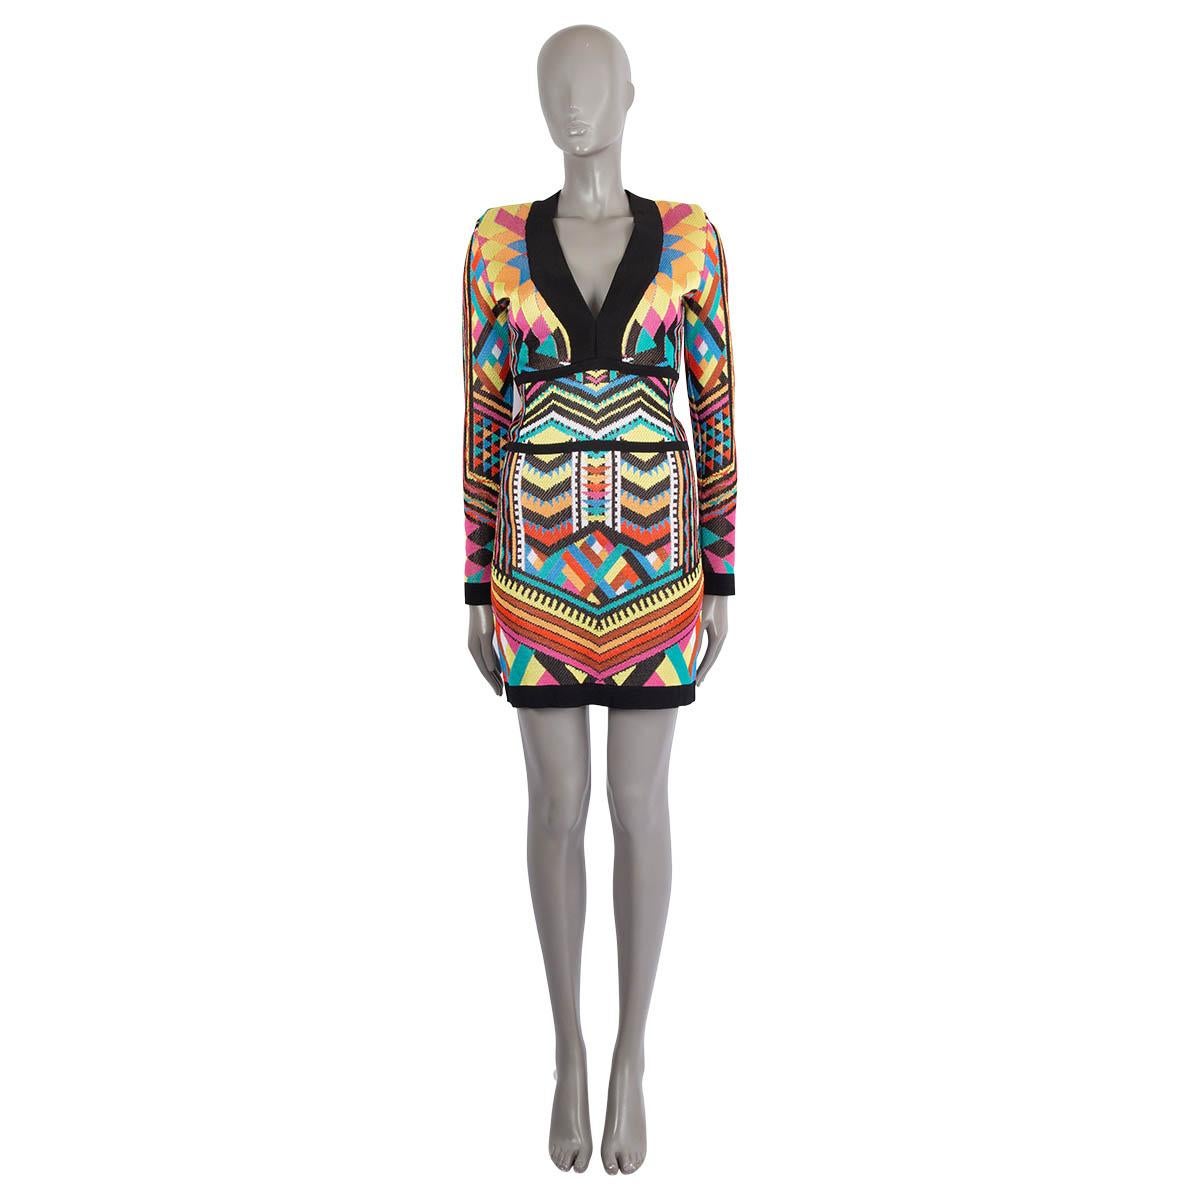 100% authentic Balmain geometric-print jacquard knit mini bodycon dress in multicolor viscose (100%). Features strong padded shoulders, V-neck, long sleeve and empire waist. Closes with a zipper in the back. Has been worn and is in excellent